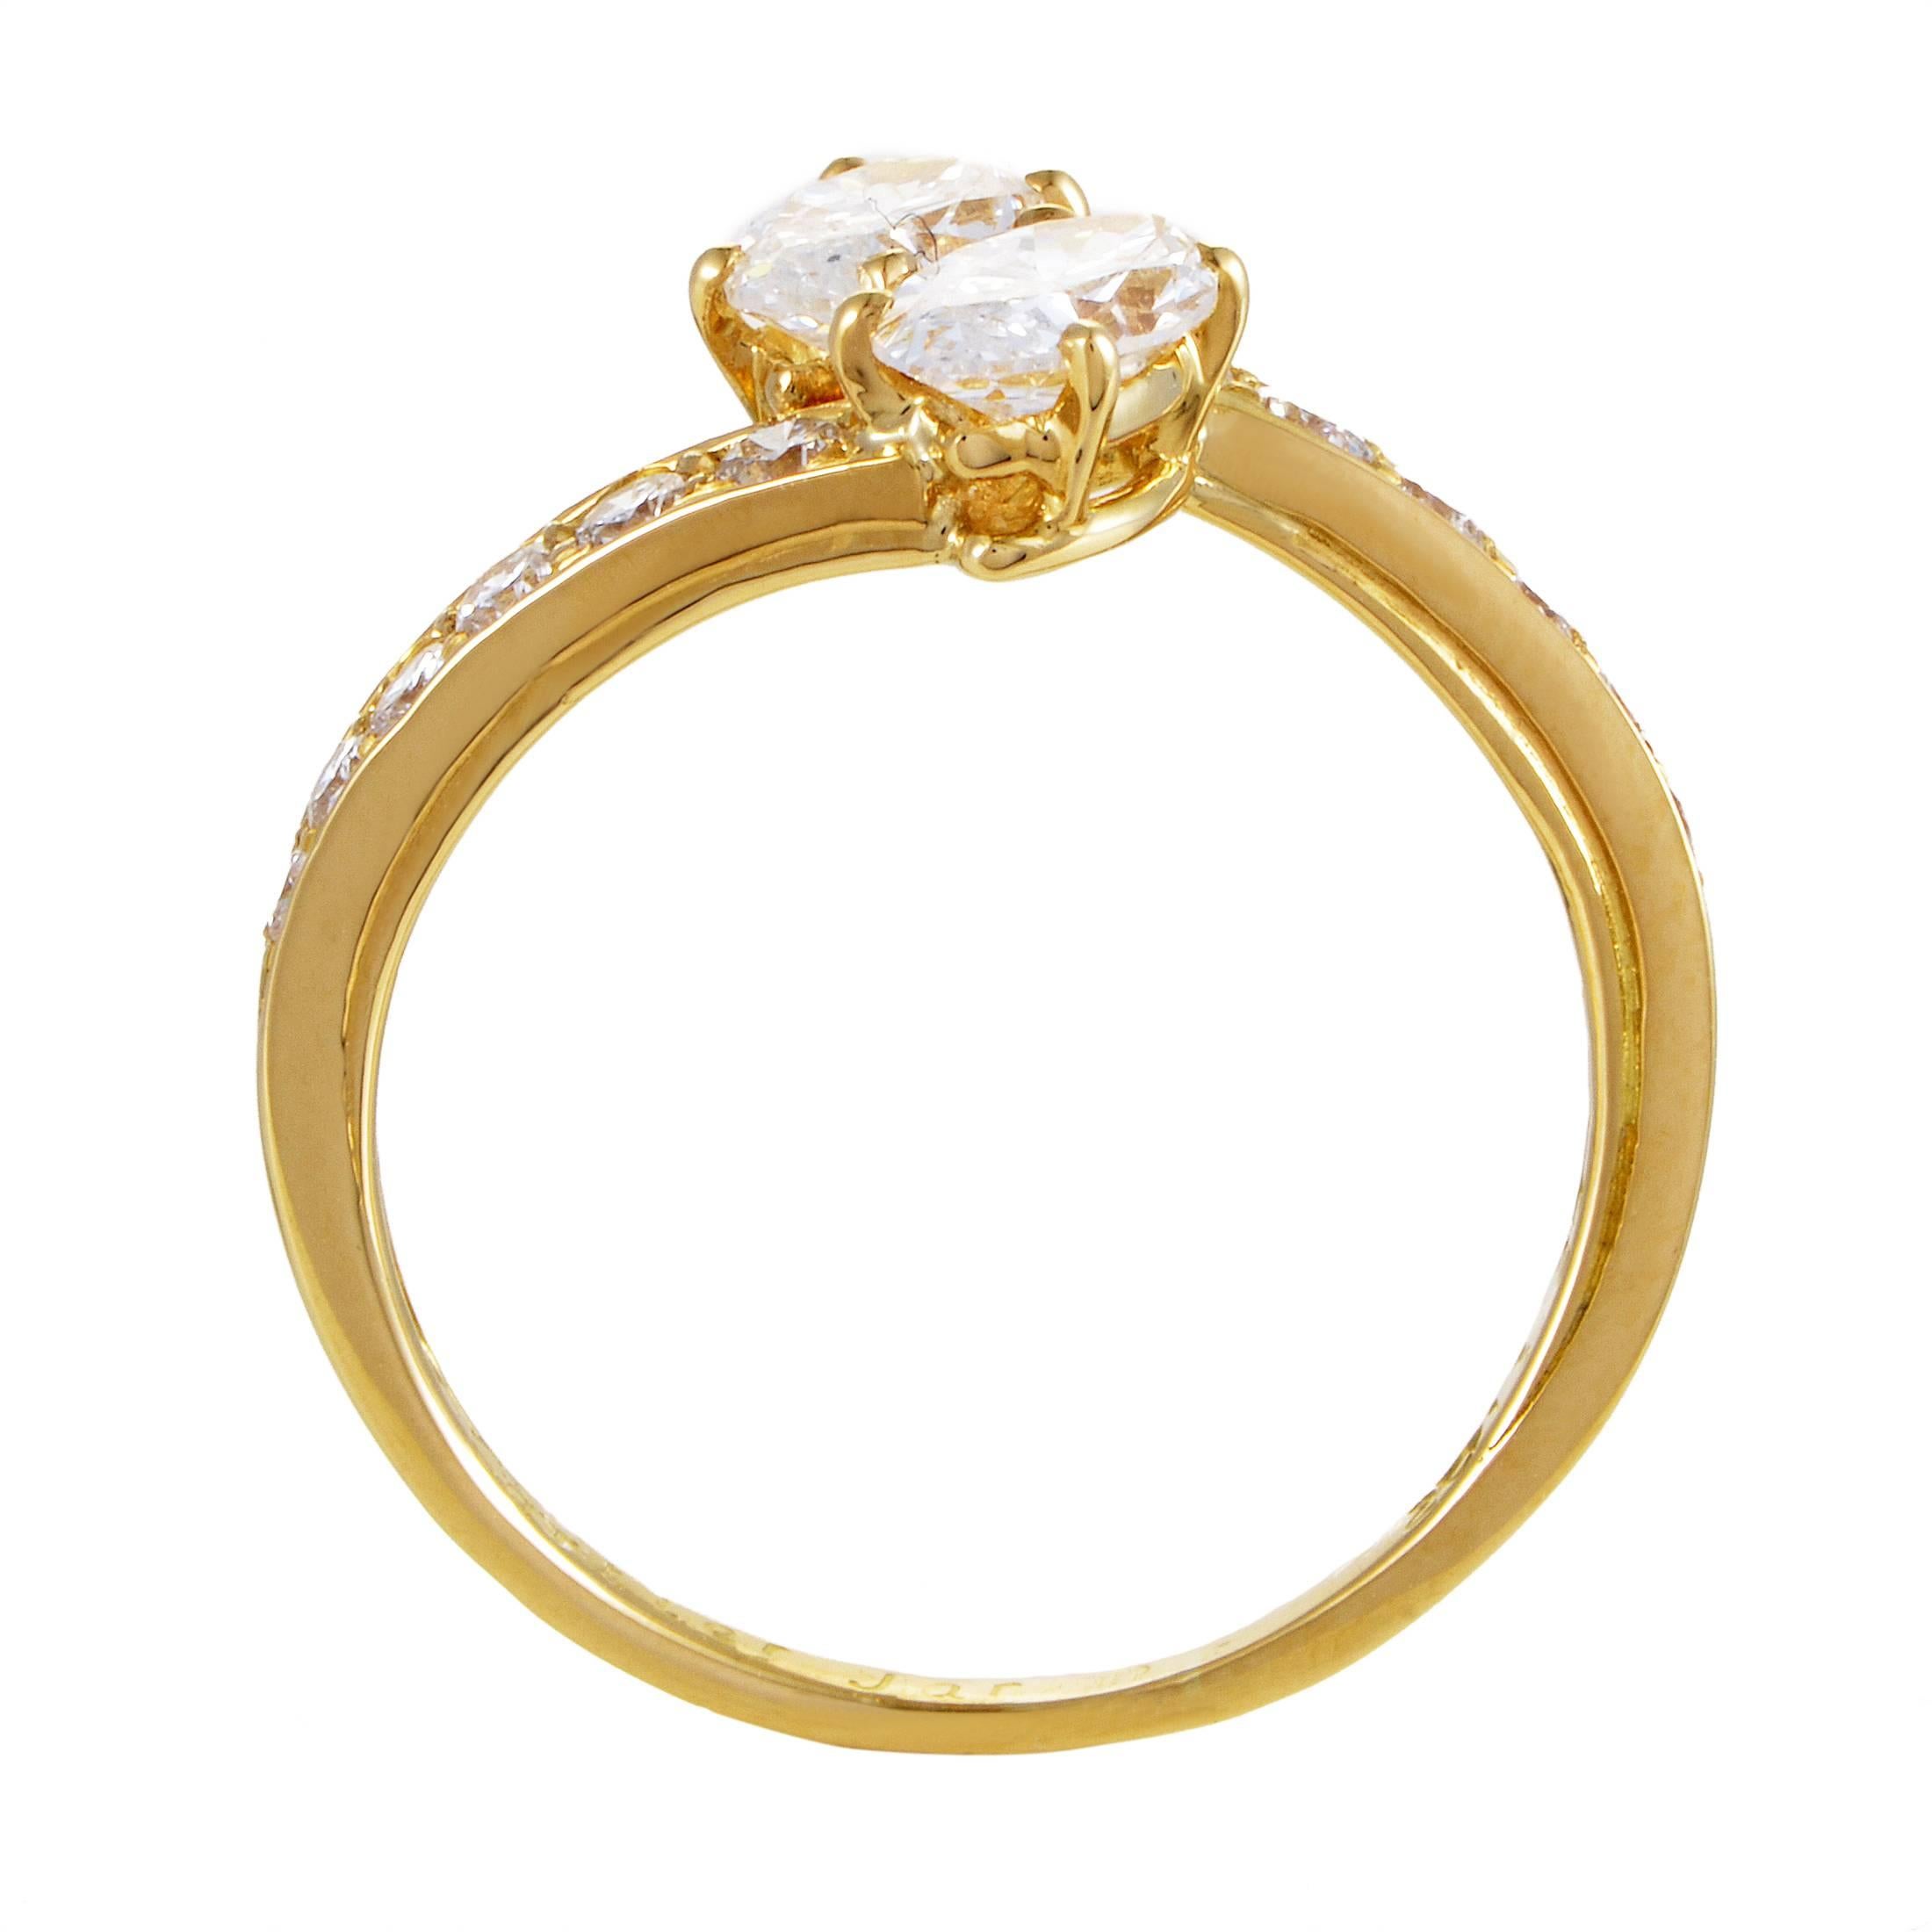 A sight of classic luxury and delightful femininity, this fabulous ring from Cartier boasts a gracefully slender body made of enchanting 18K yellow gold adorned with stunning F-color diamonds of VVS clarity weighing in total 1.25 carats.
Ring Size: